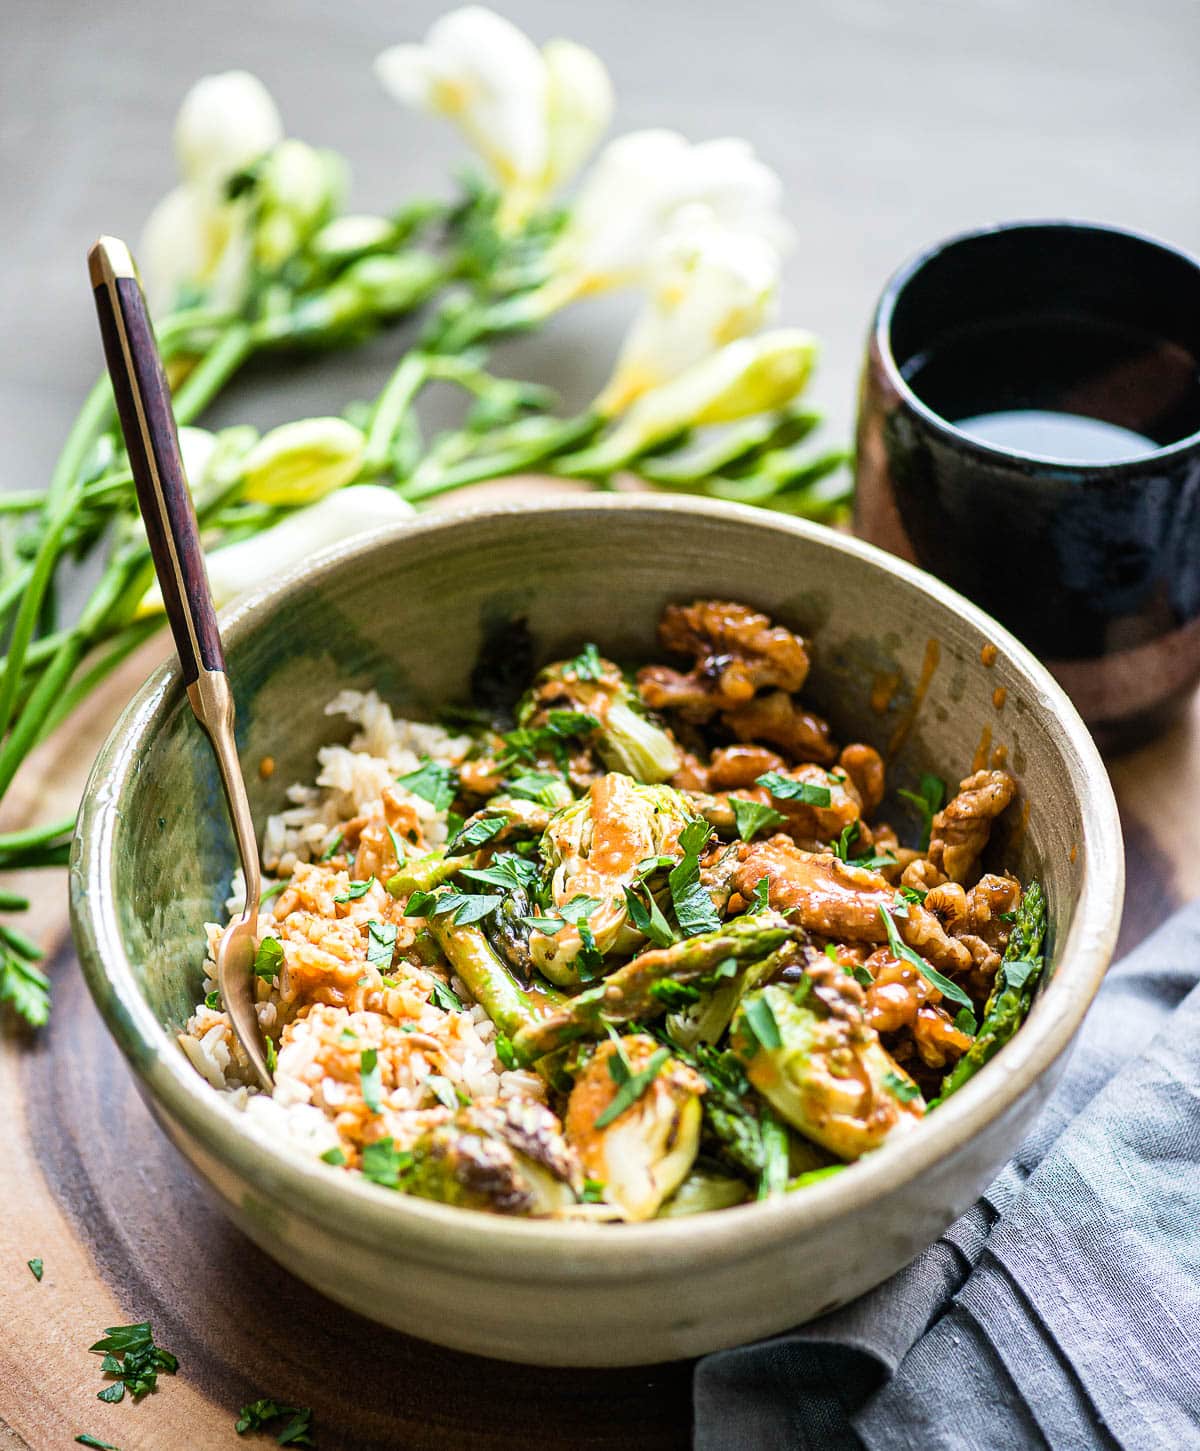 Vegetable rice bowl with savory sauce that's part of the Daniel Fast Recipes